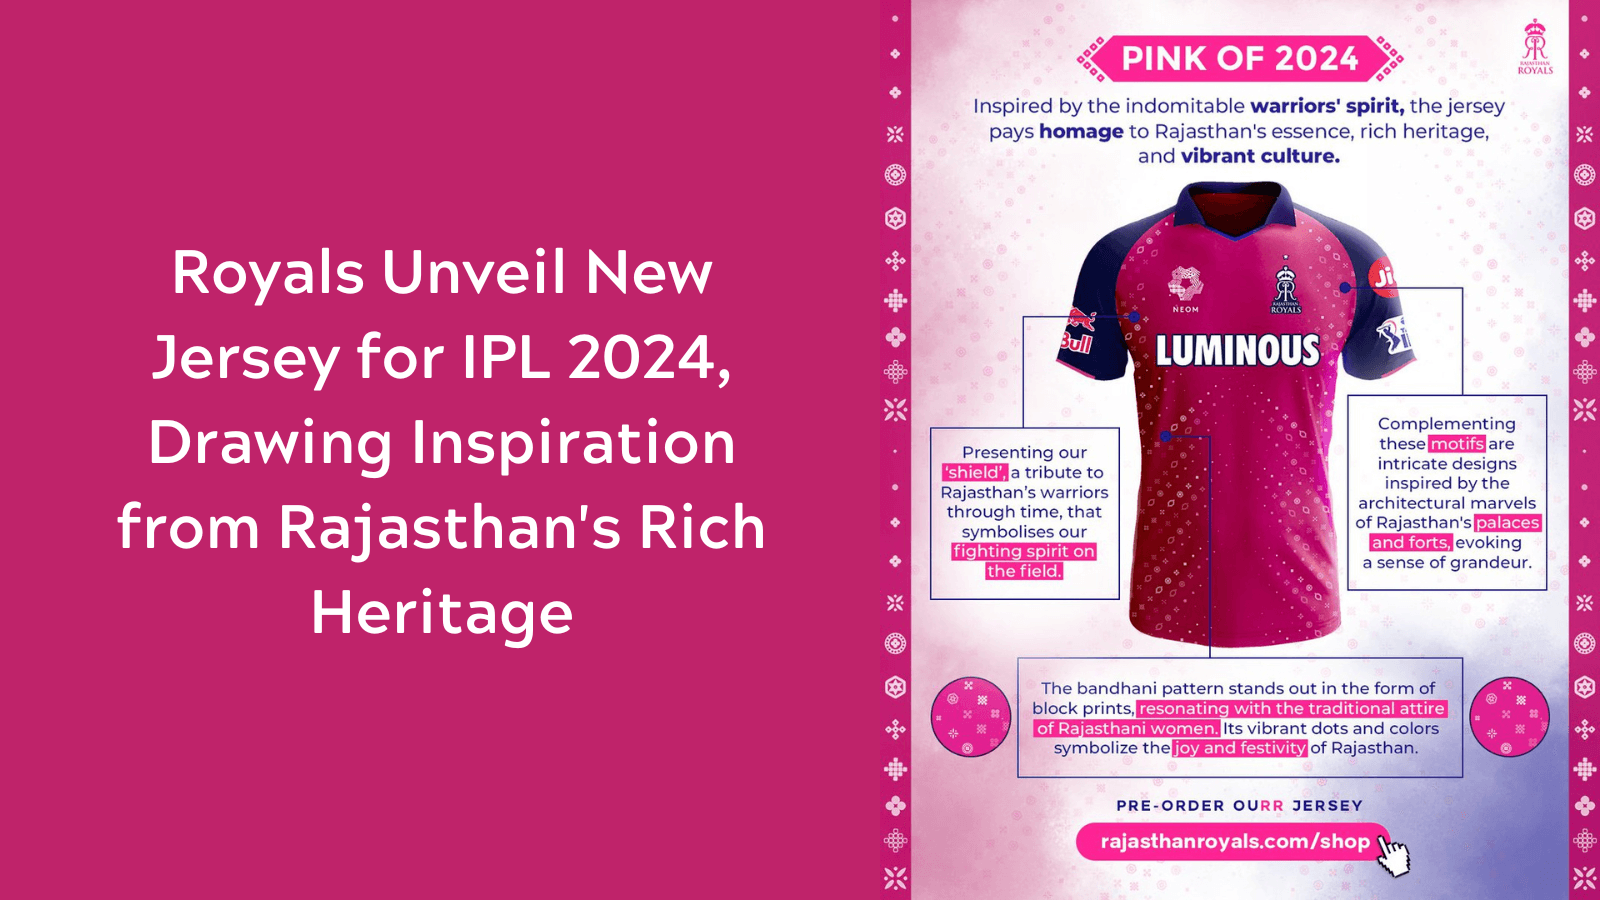 Royals Unveil New Jersey for IPL 2024, Drawing Inspiration from Rajasthan's Rich Heritage